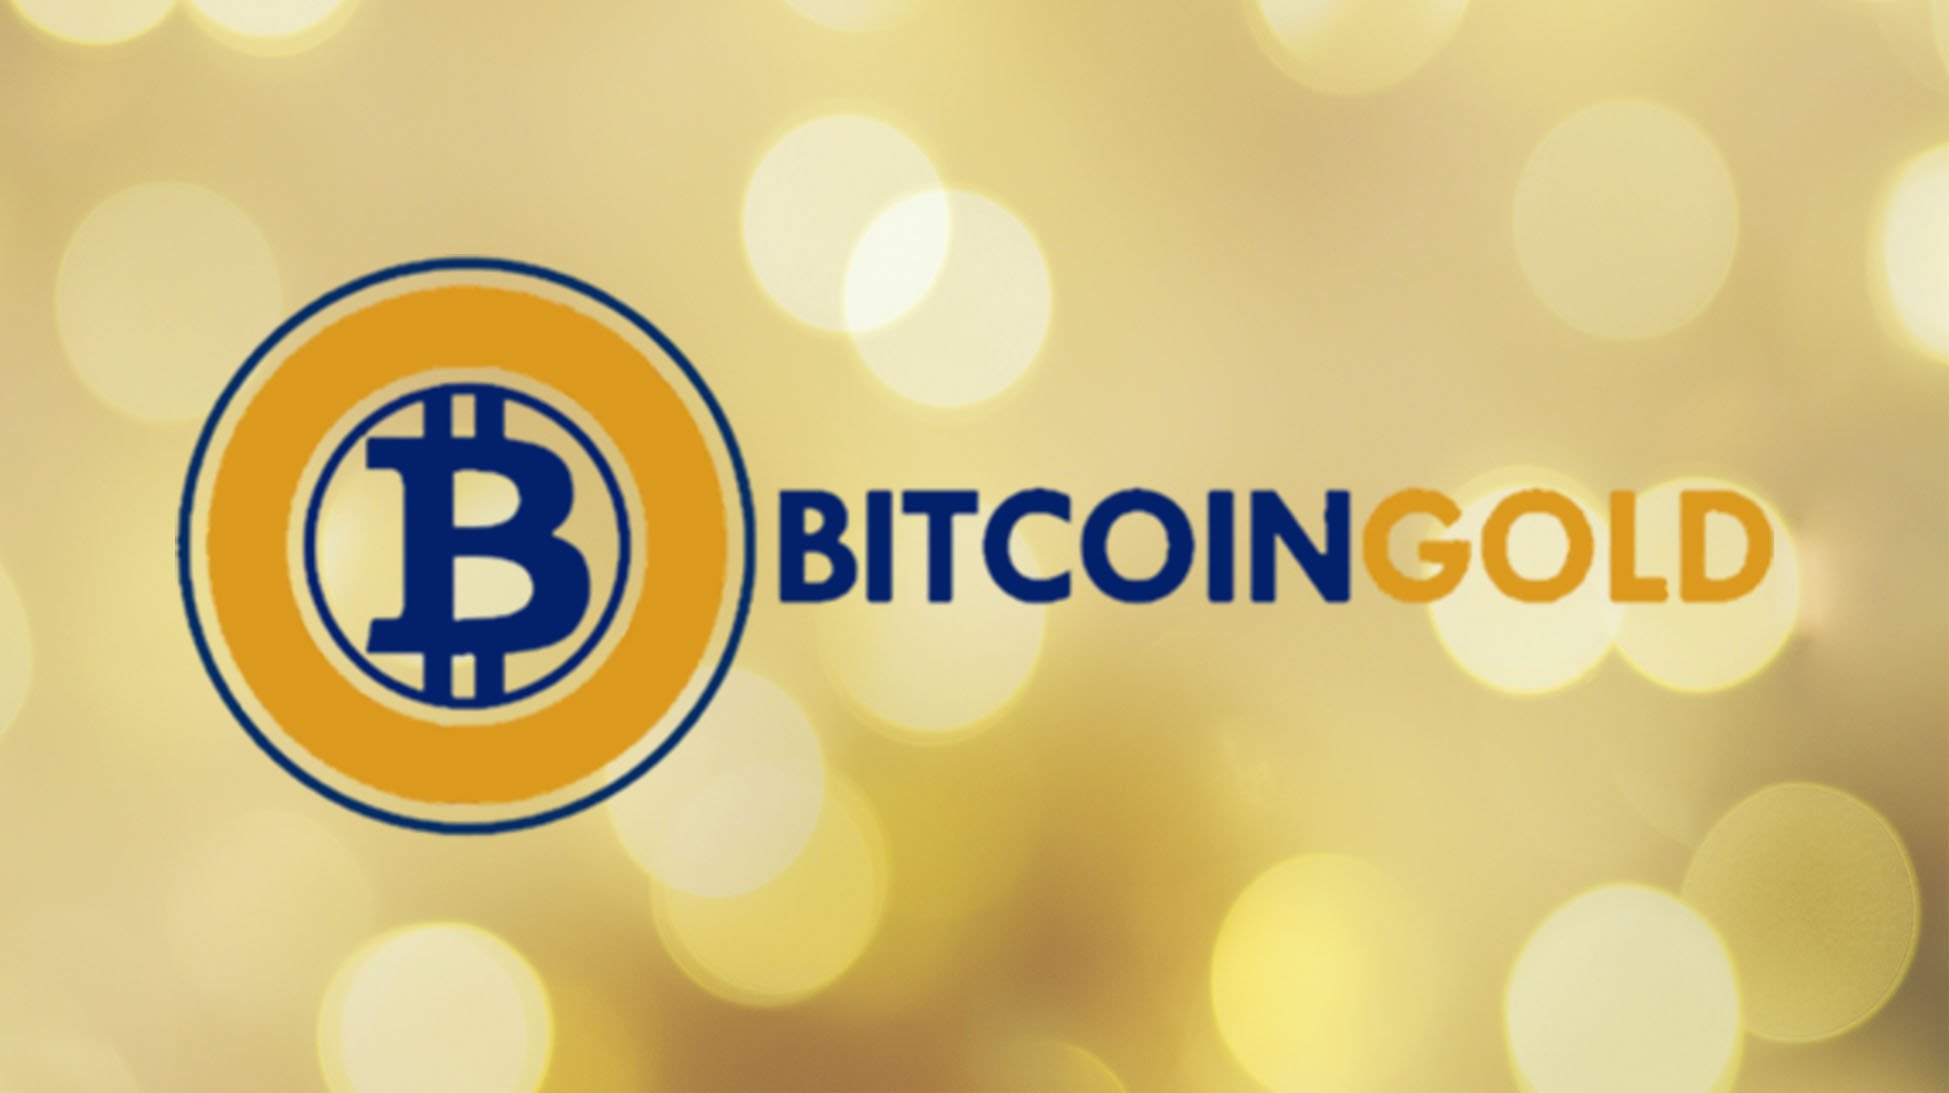 Bitcoin Gold - BTG Price Today, Live Charts and News